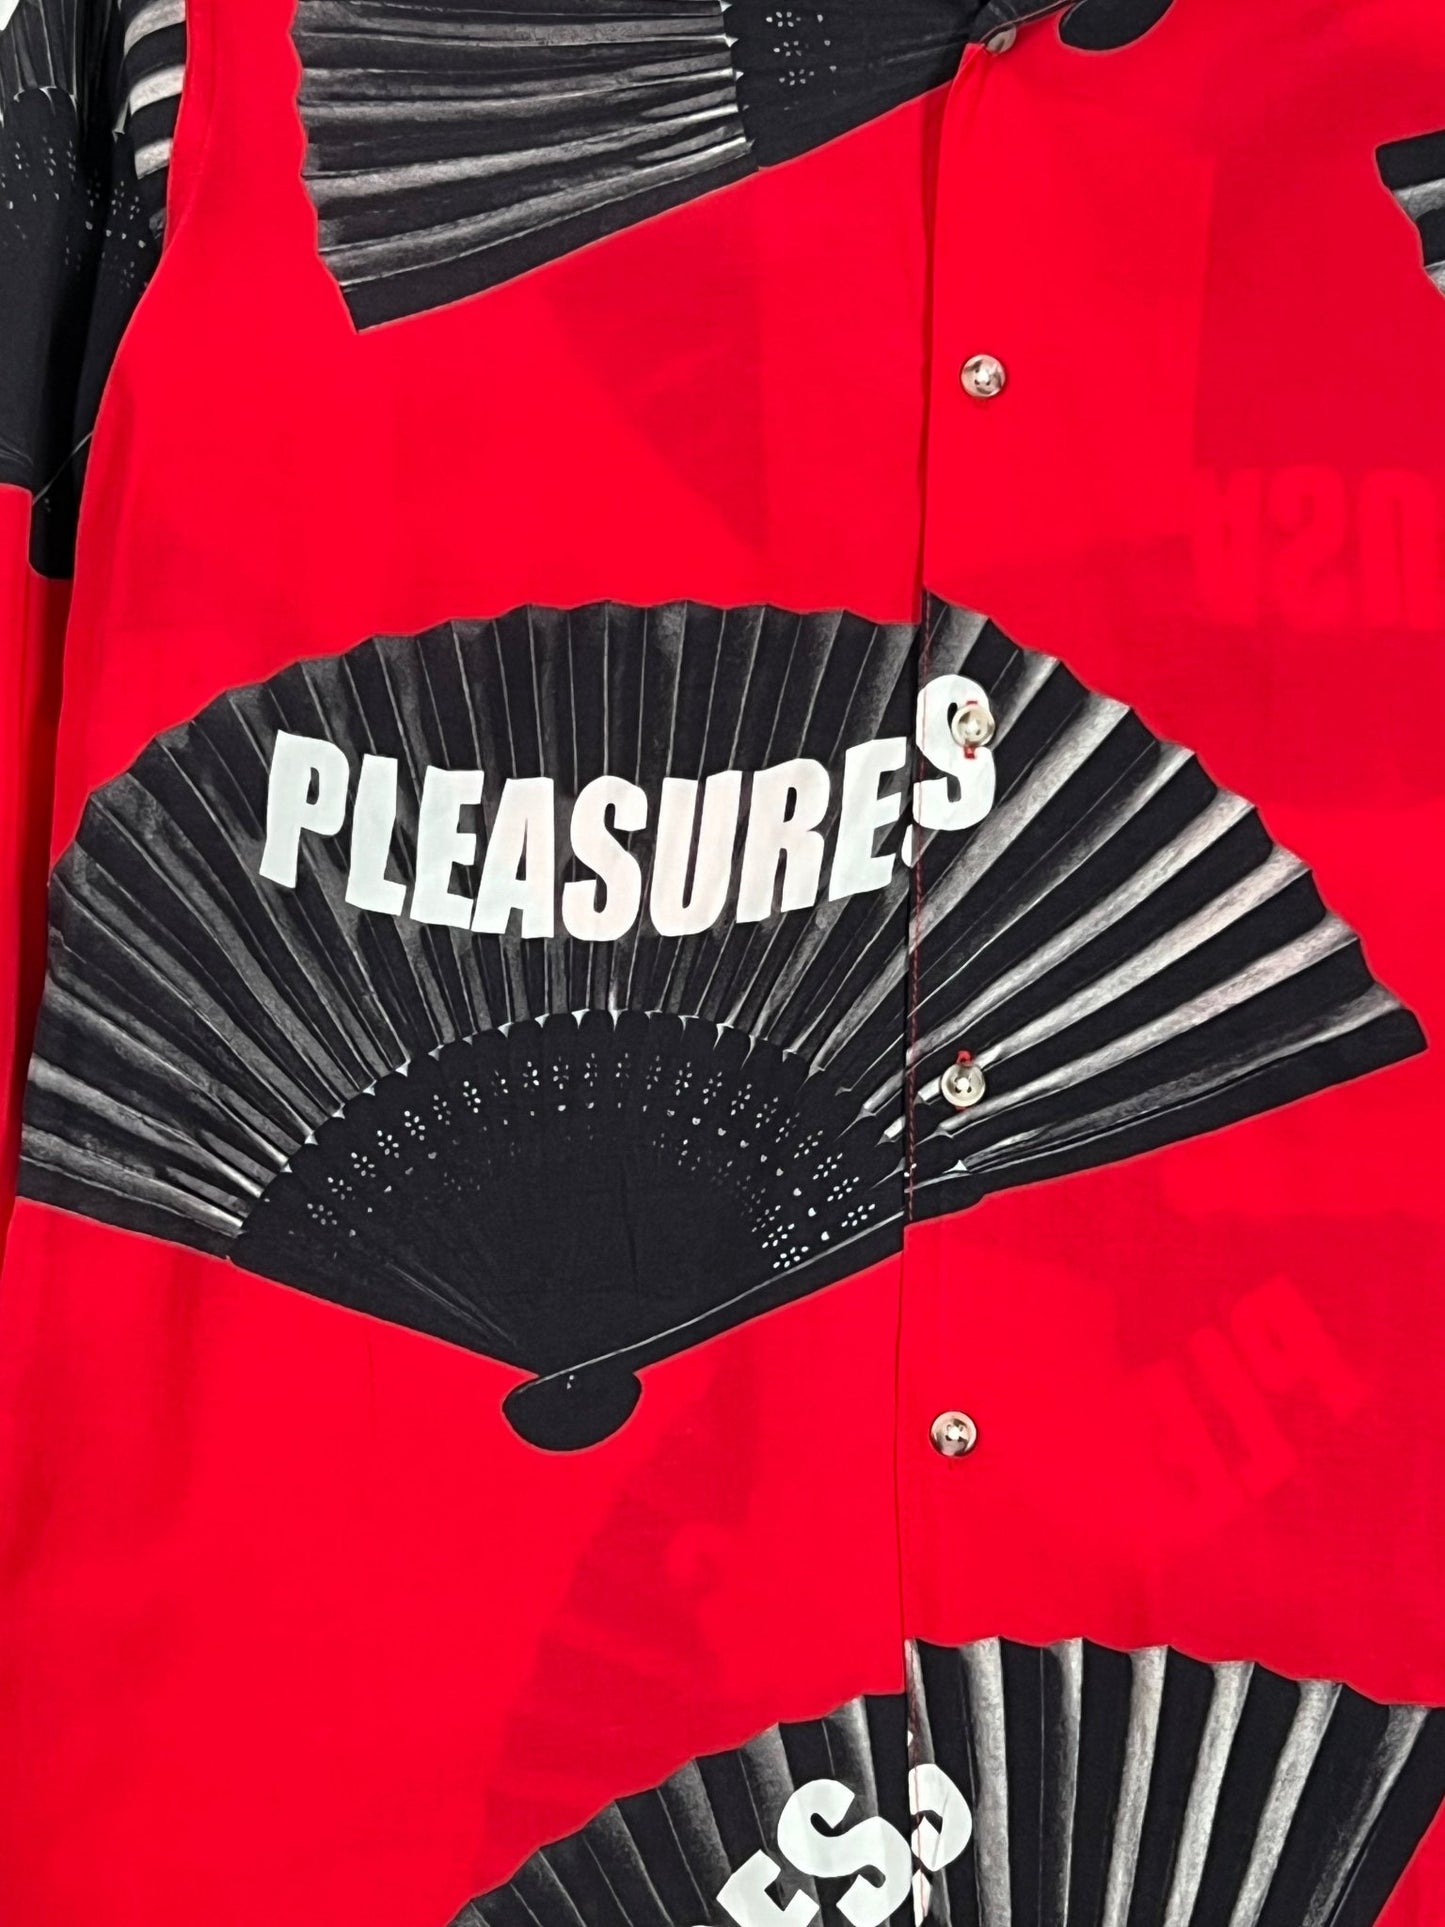 The PLEASURES FANS long sleeve button-down shirt in red and black offers unparalleled comfort.